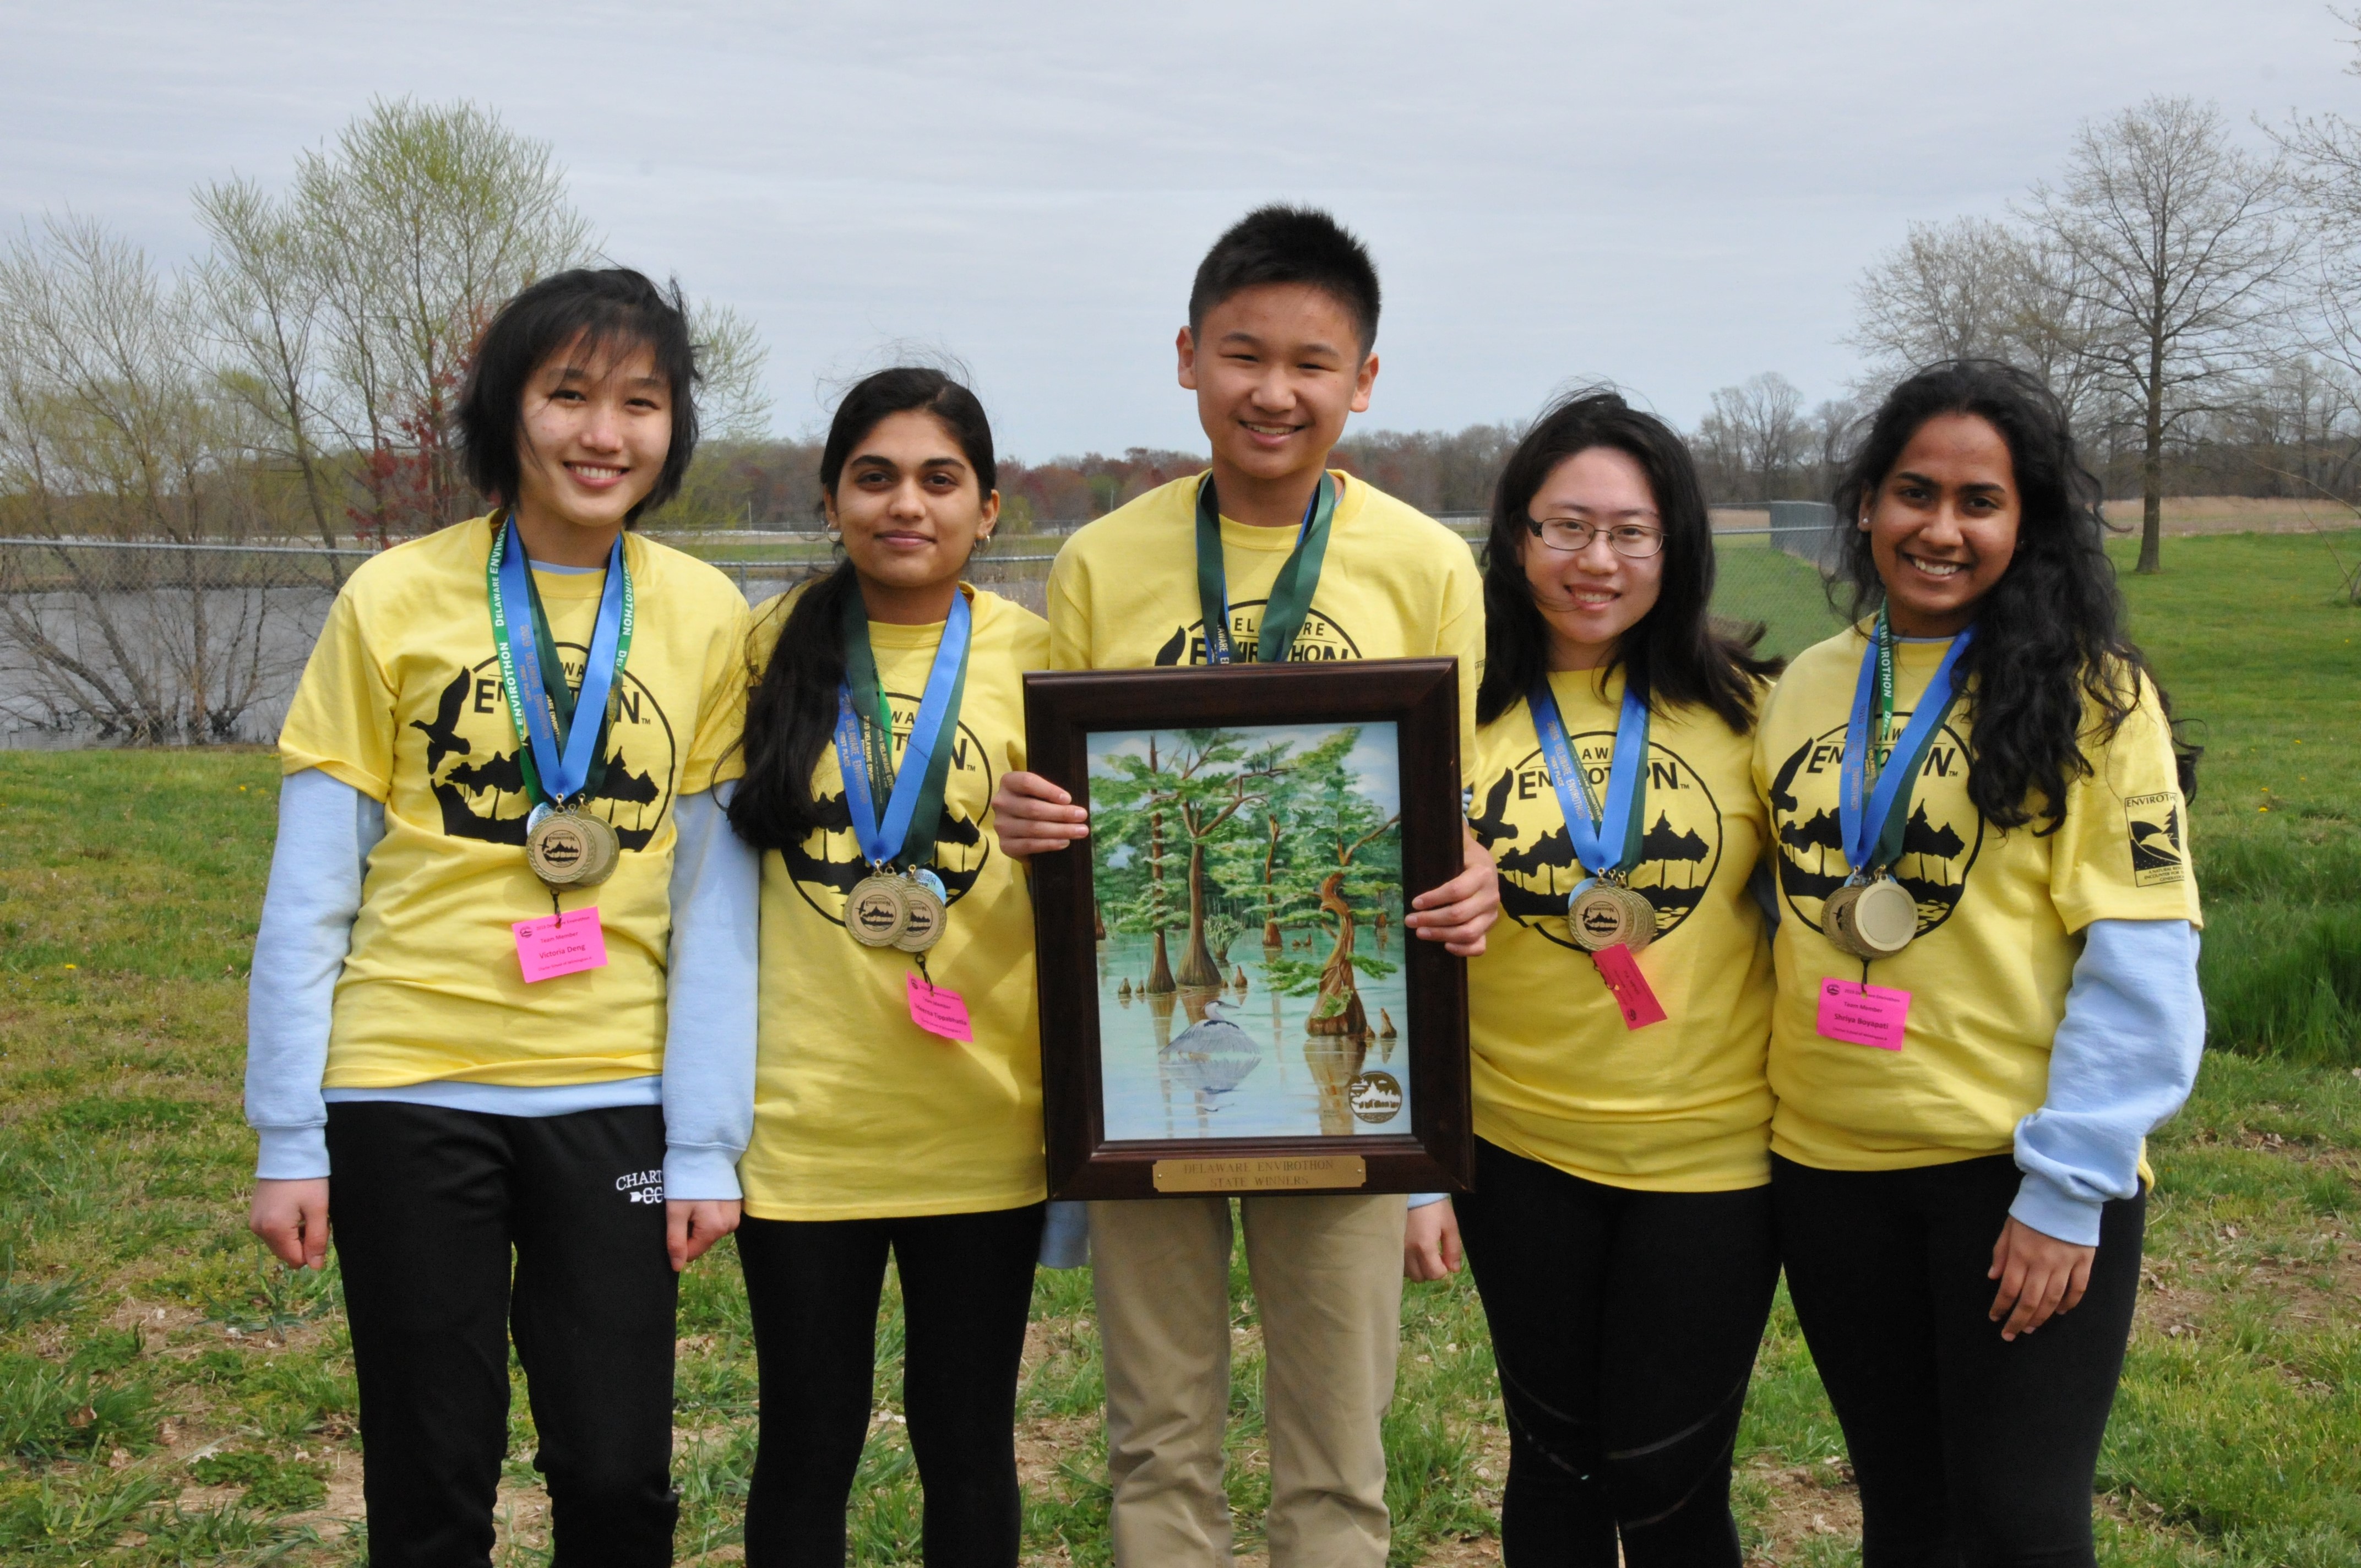 First Place Delaware Envirothon: Wilmington Team A, left to right: Victoria Deng, Udeerna Tippabhatla, Darren Wu, Shan Yu, and Shriya Boyapati. DNREC photo. (Additional photos available by request.)